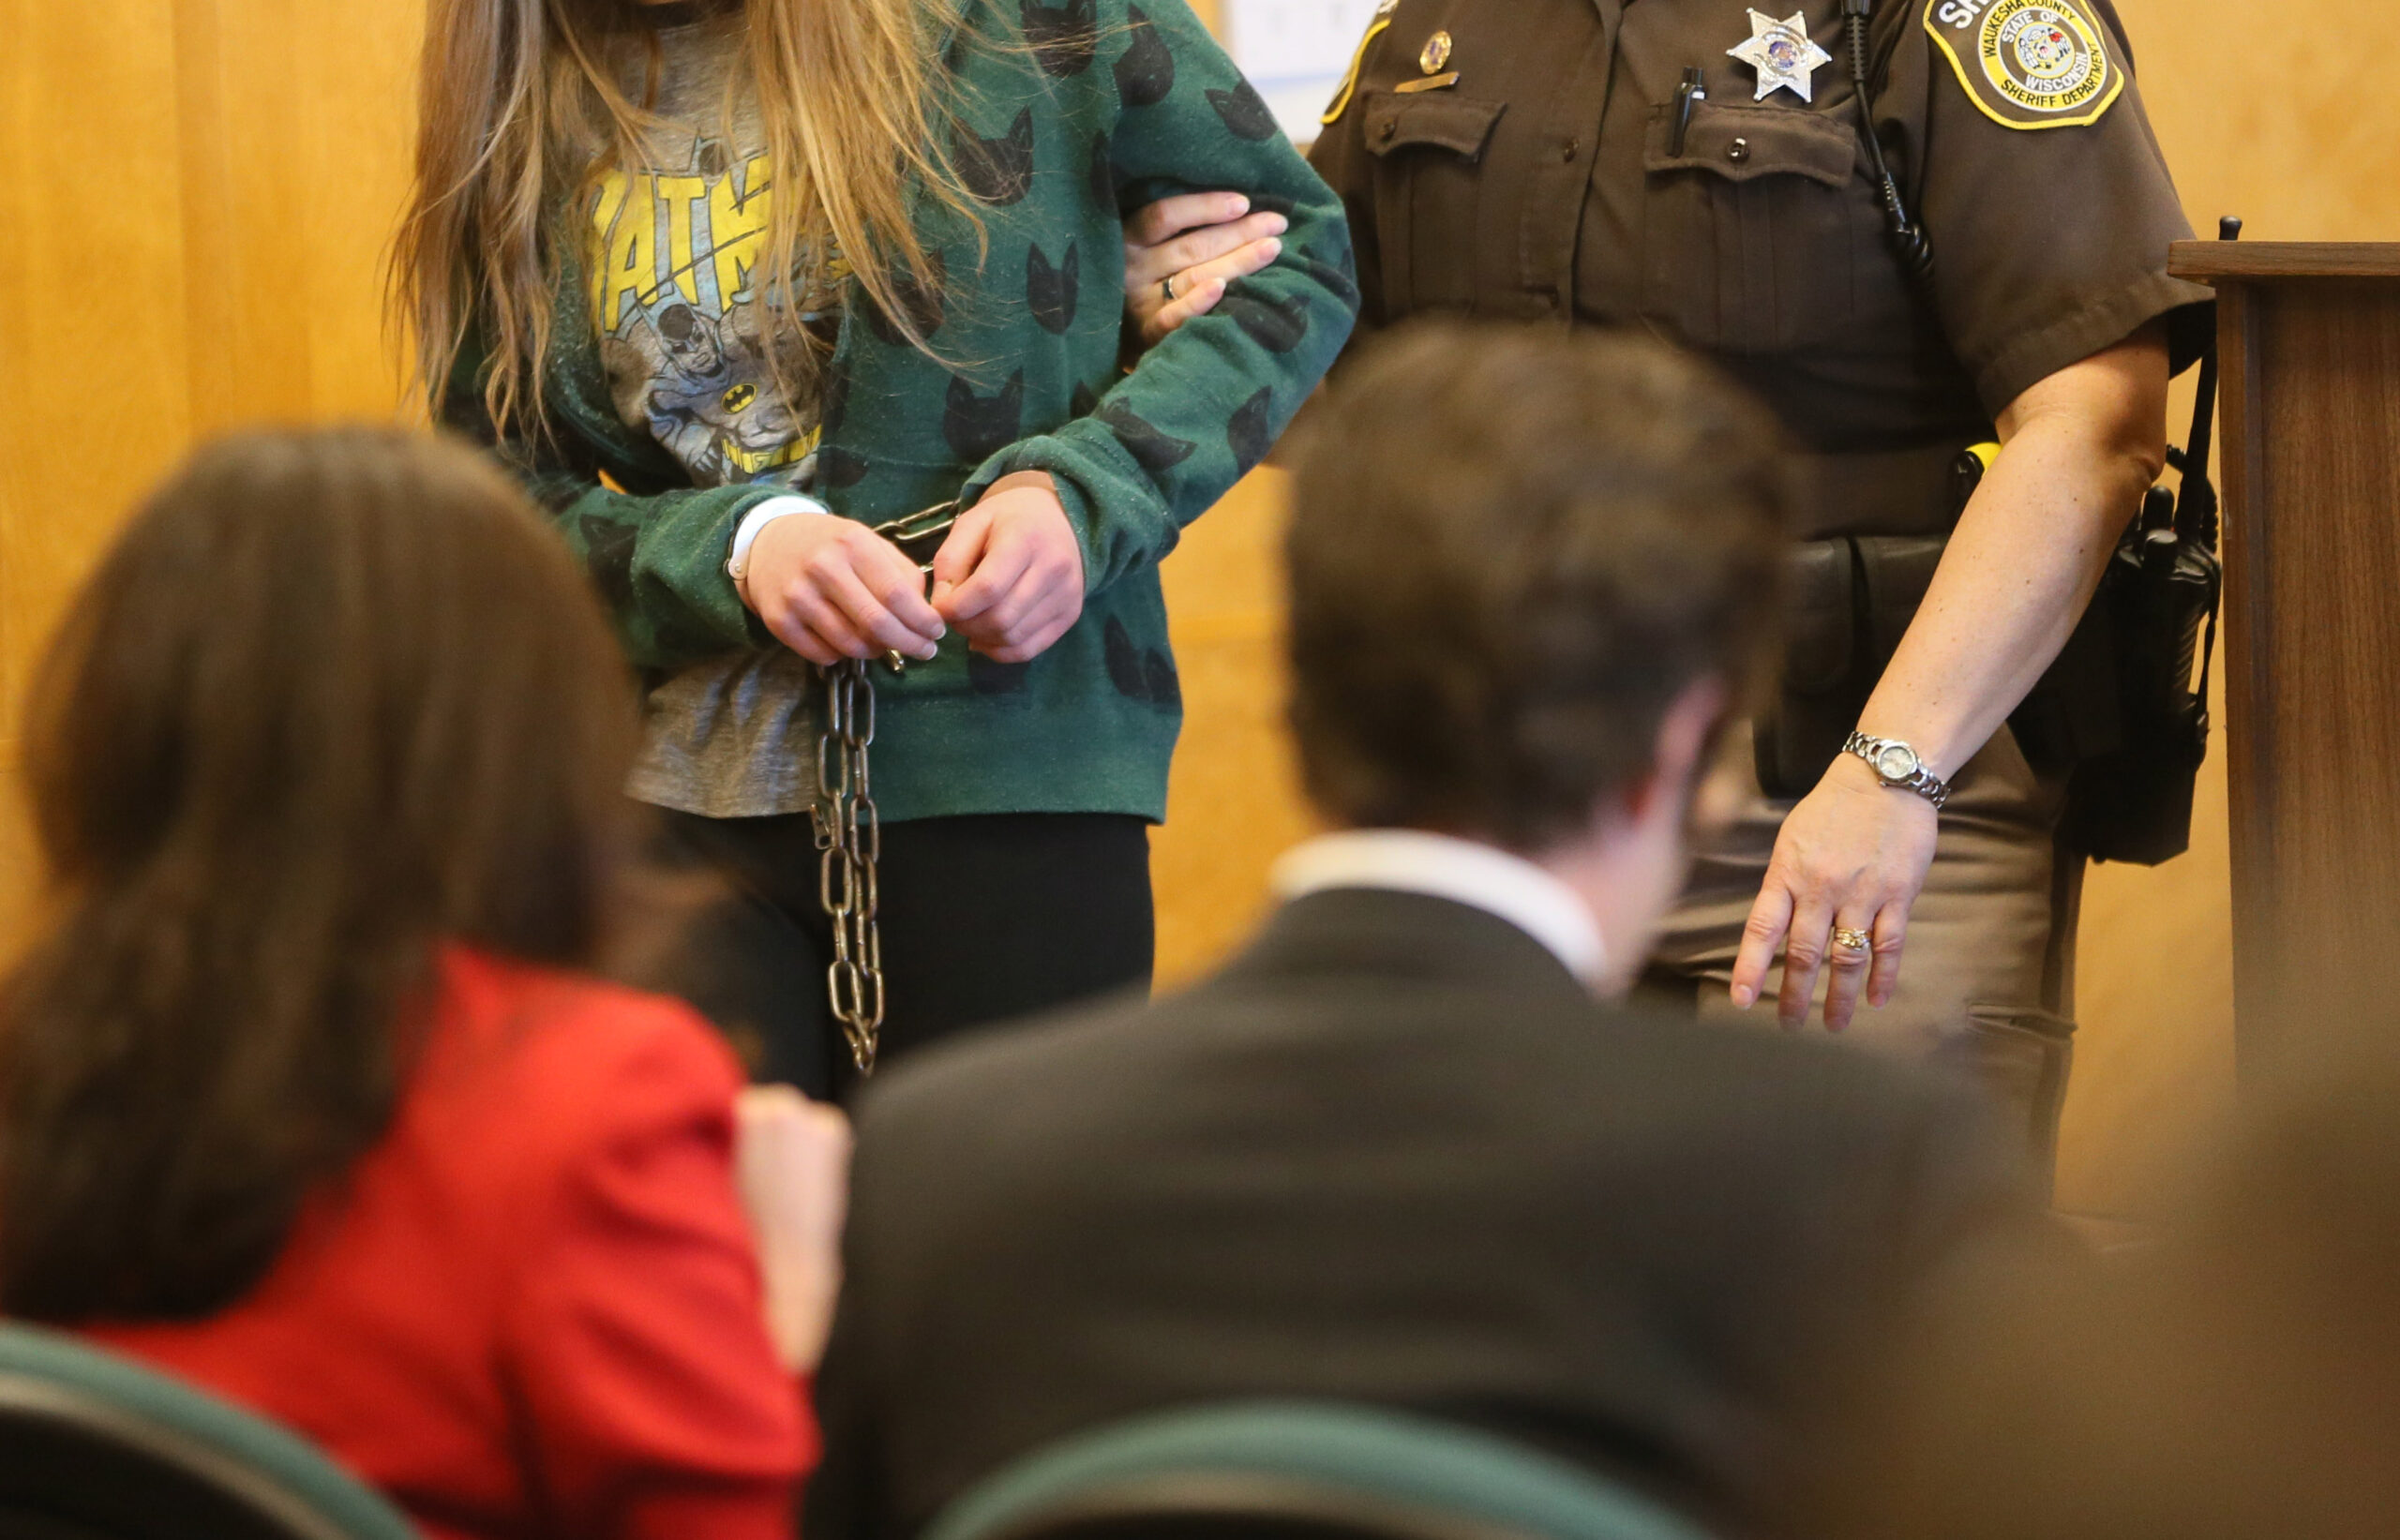 A girl being led into a courtroom by an officer